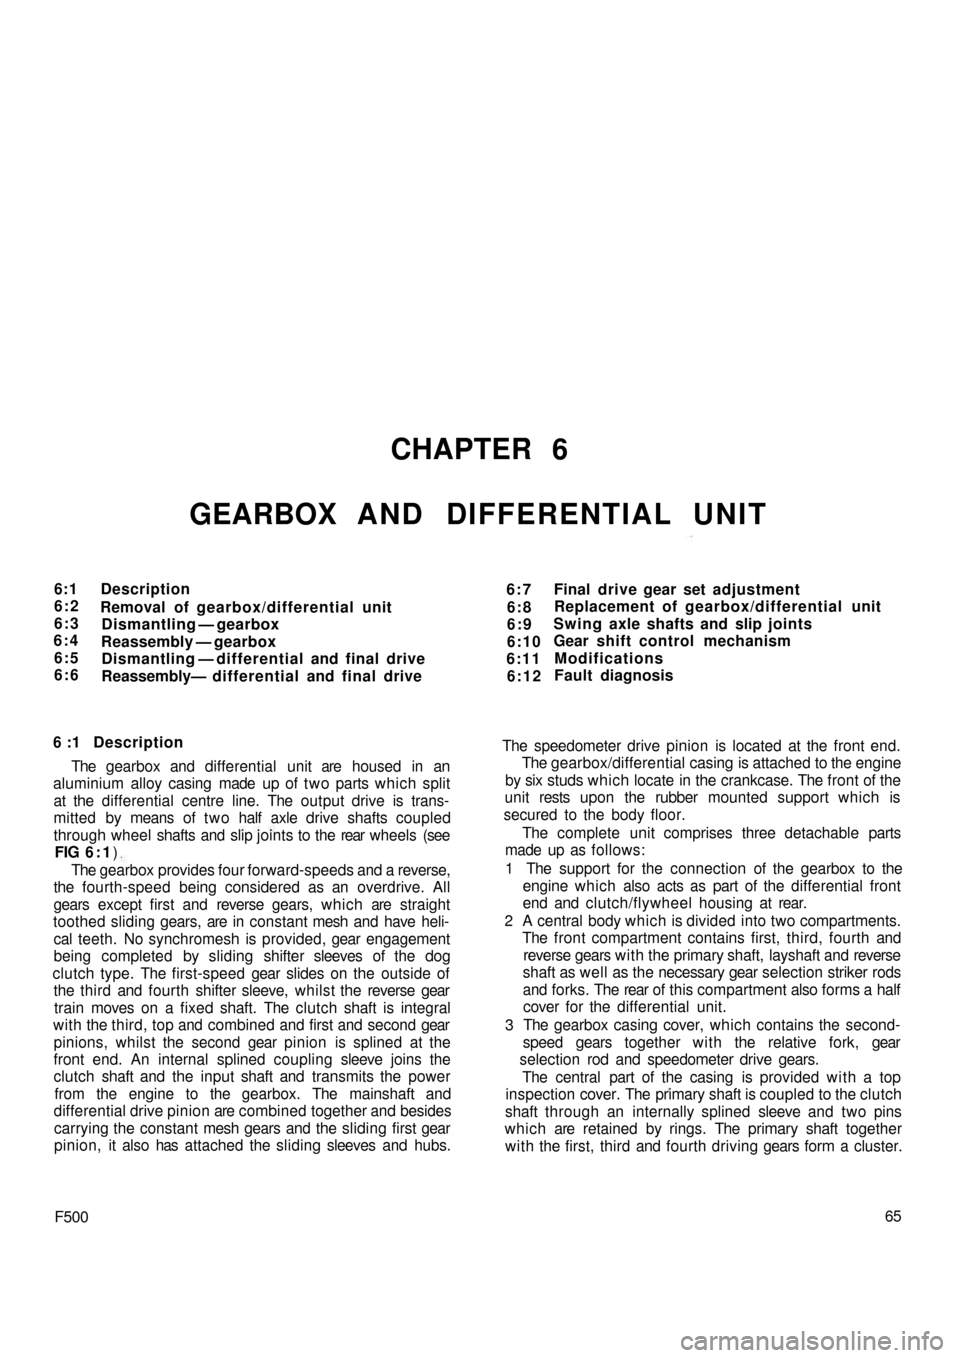 FIAT 500 1957 1.G Repair Manual CHAPTER 6
GEARBOX AND DIFFERENTIAL UNIT
6:1
6:2
6:3
6:4
6:5
6:6Description
Removal of gearbox/differential unit
Dismantling — gearbox
Reassembly — gearbox
Dismantling — differential and final dr